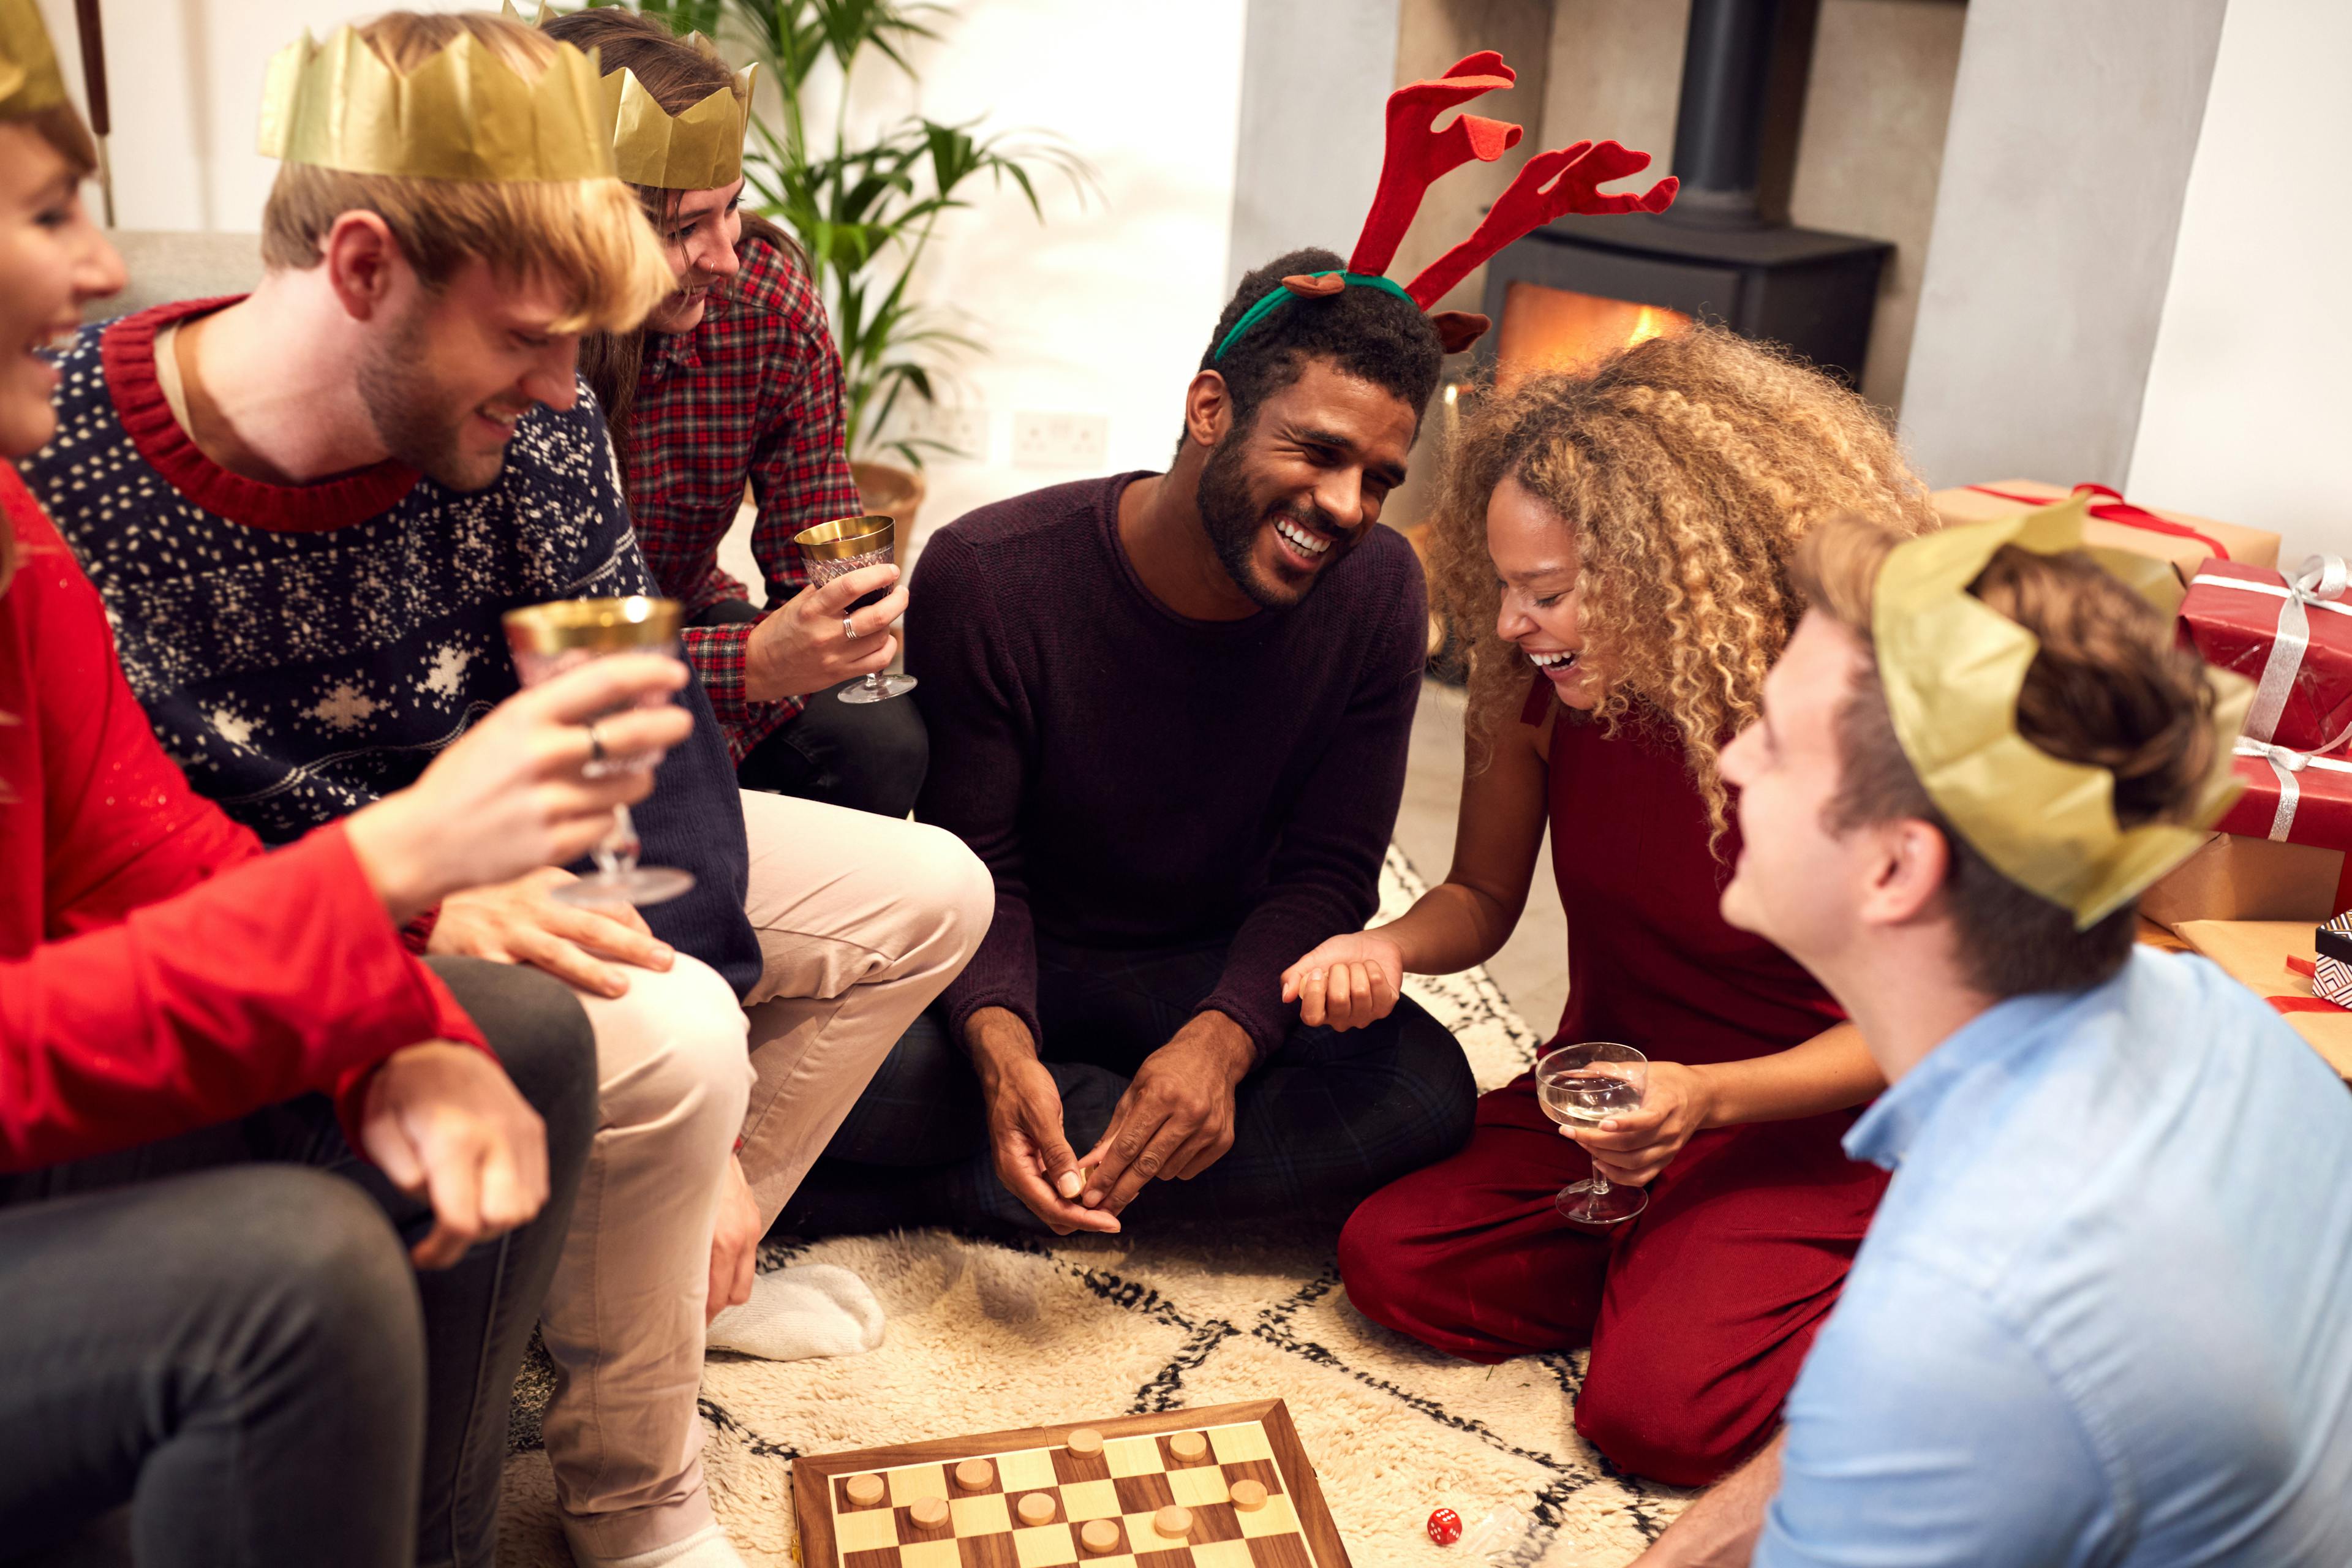 5 Party Games to Liven Up Your Holiday Gathering